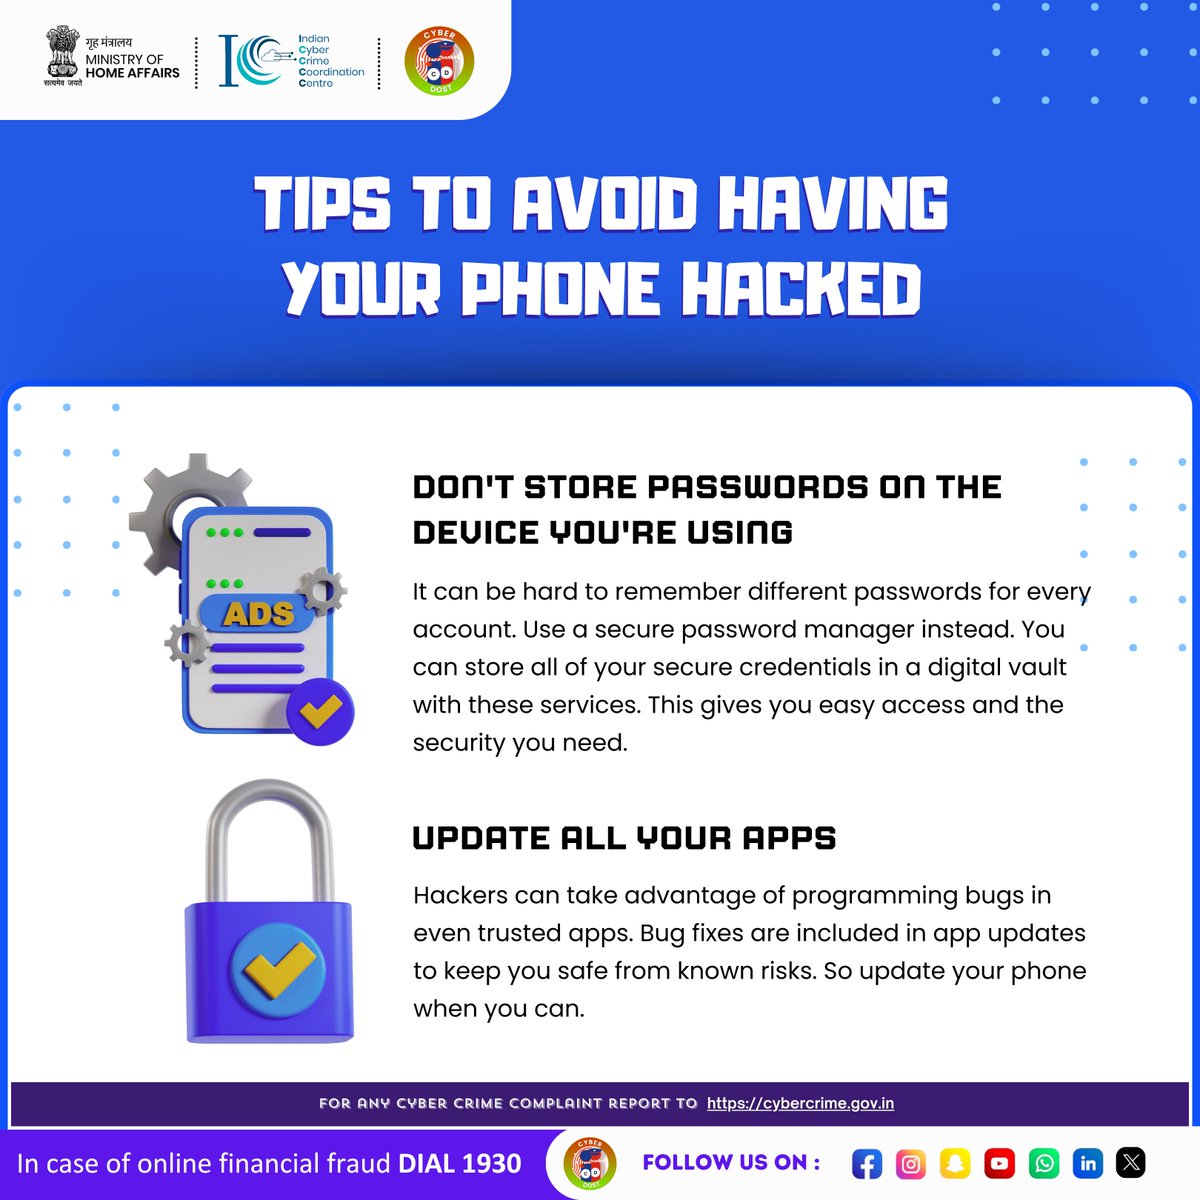 'Protect Your Phone: Top Tips to Avoid Hacking'
#I4C #MHA #Cyberdost #Cybercrime #Cybersecurity #DigitalSafety #Stayalert #News #SocialmediaInsights #Share #Awareness